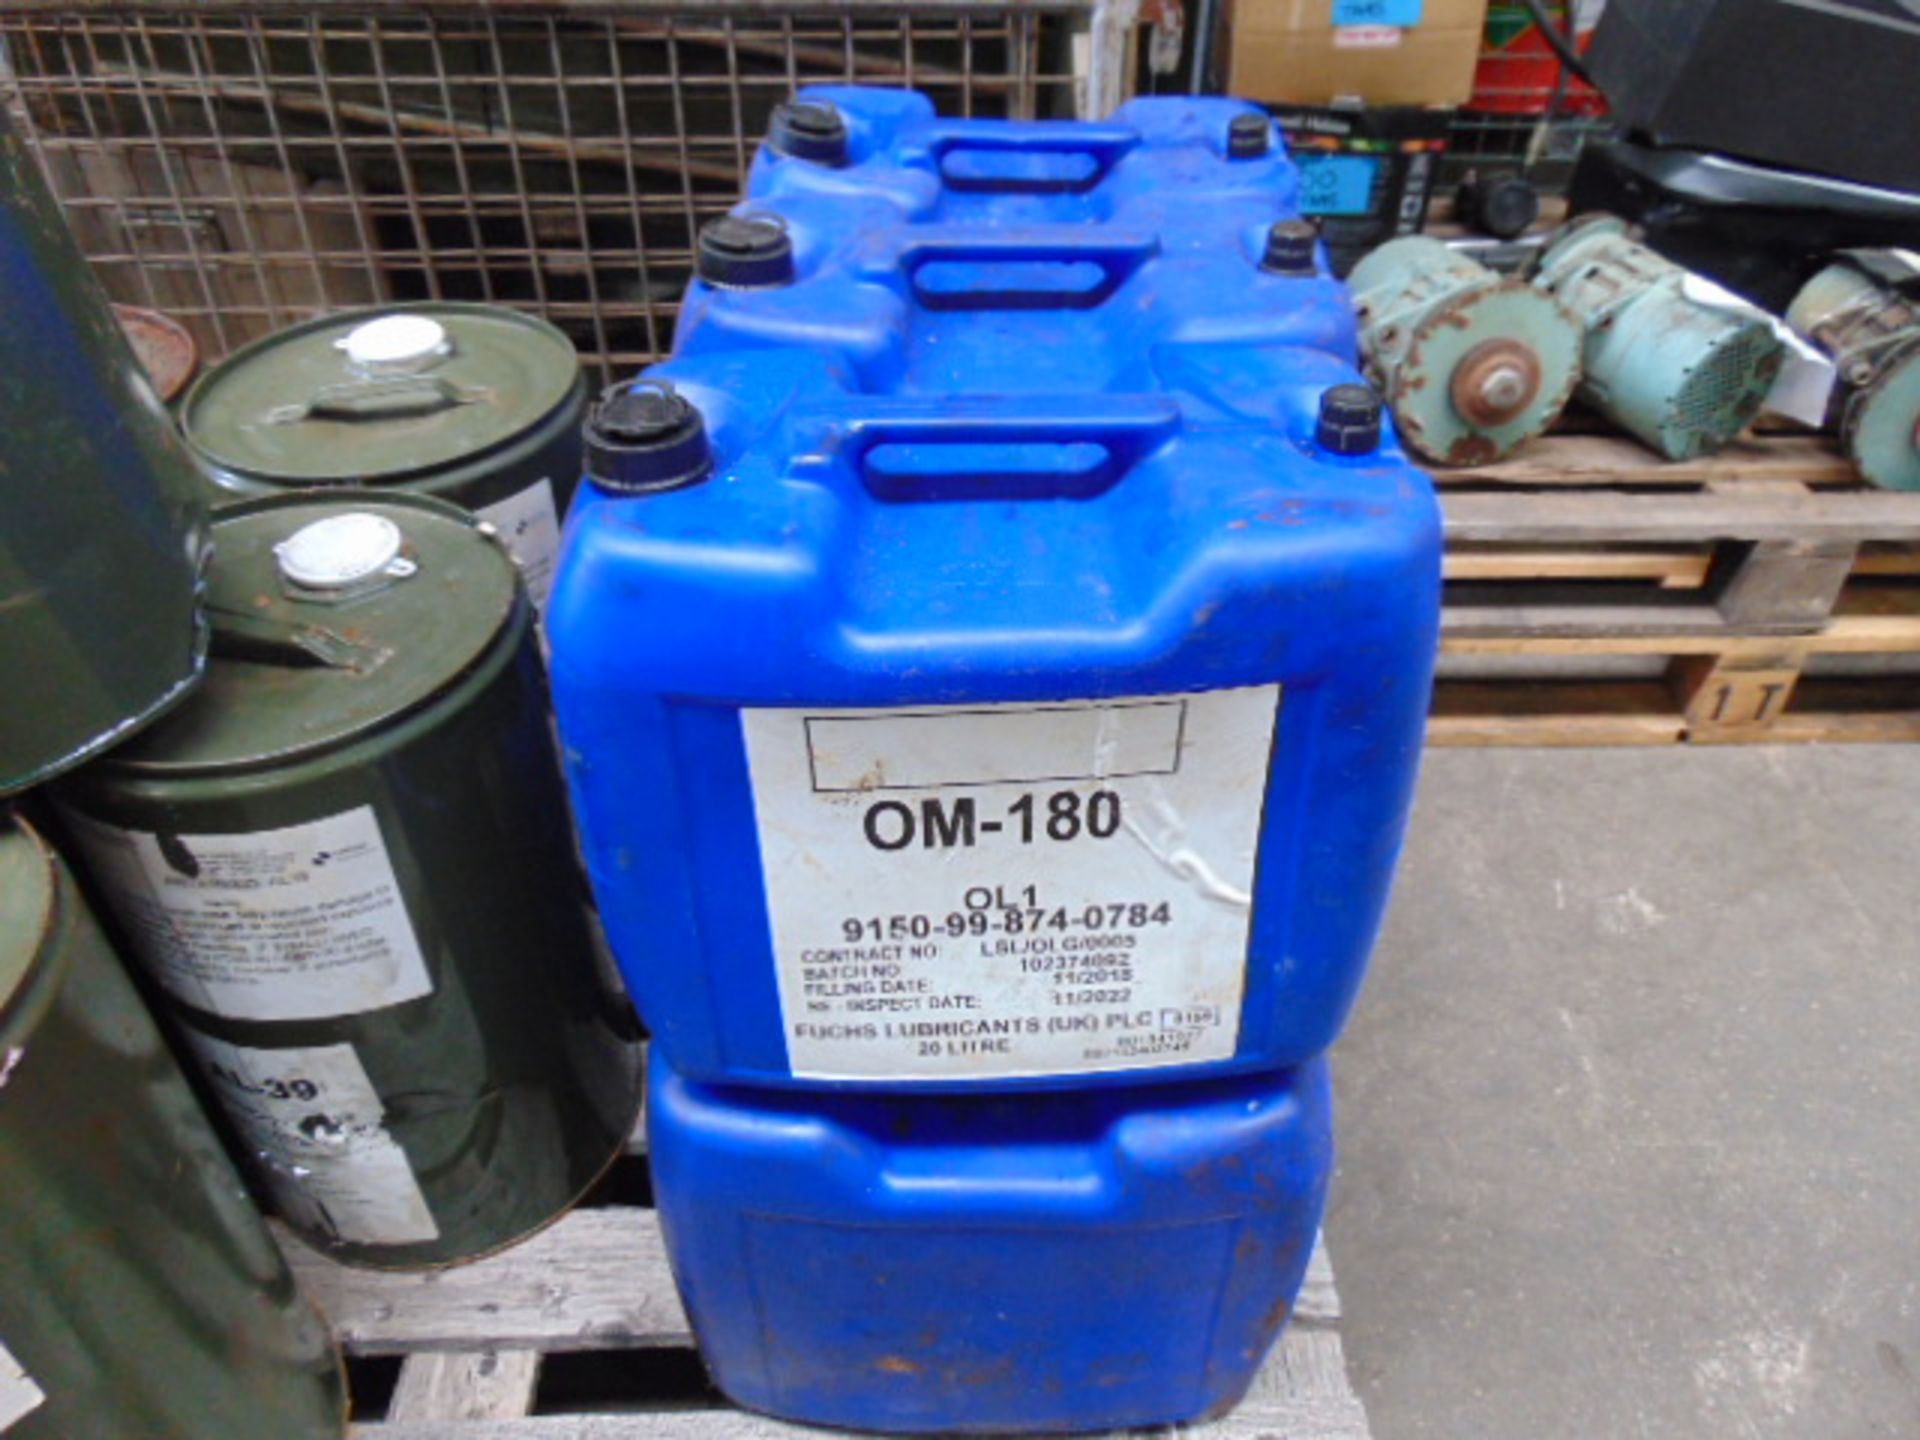 6 x Unissued 20L Drums of OM-180 High Quality Air Compressor Lubricating Oil